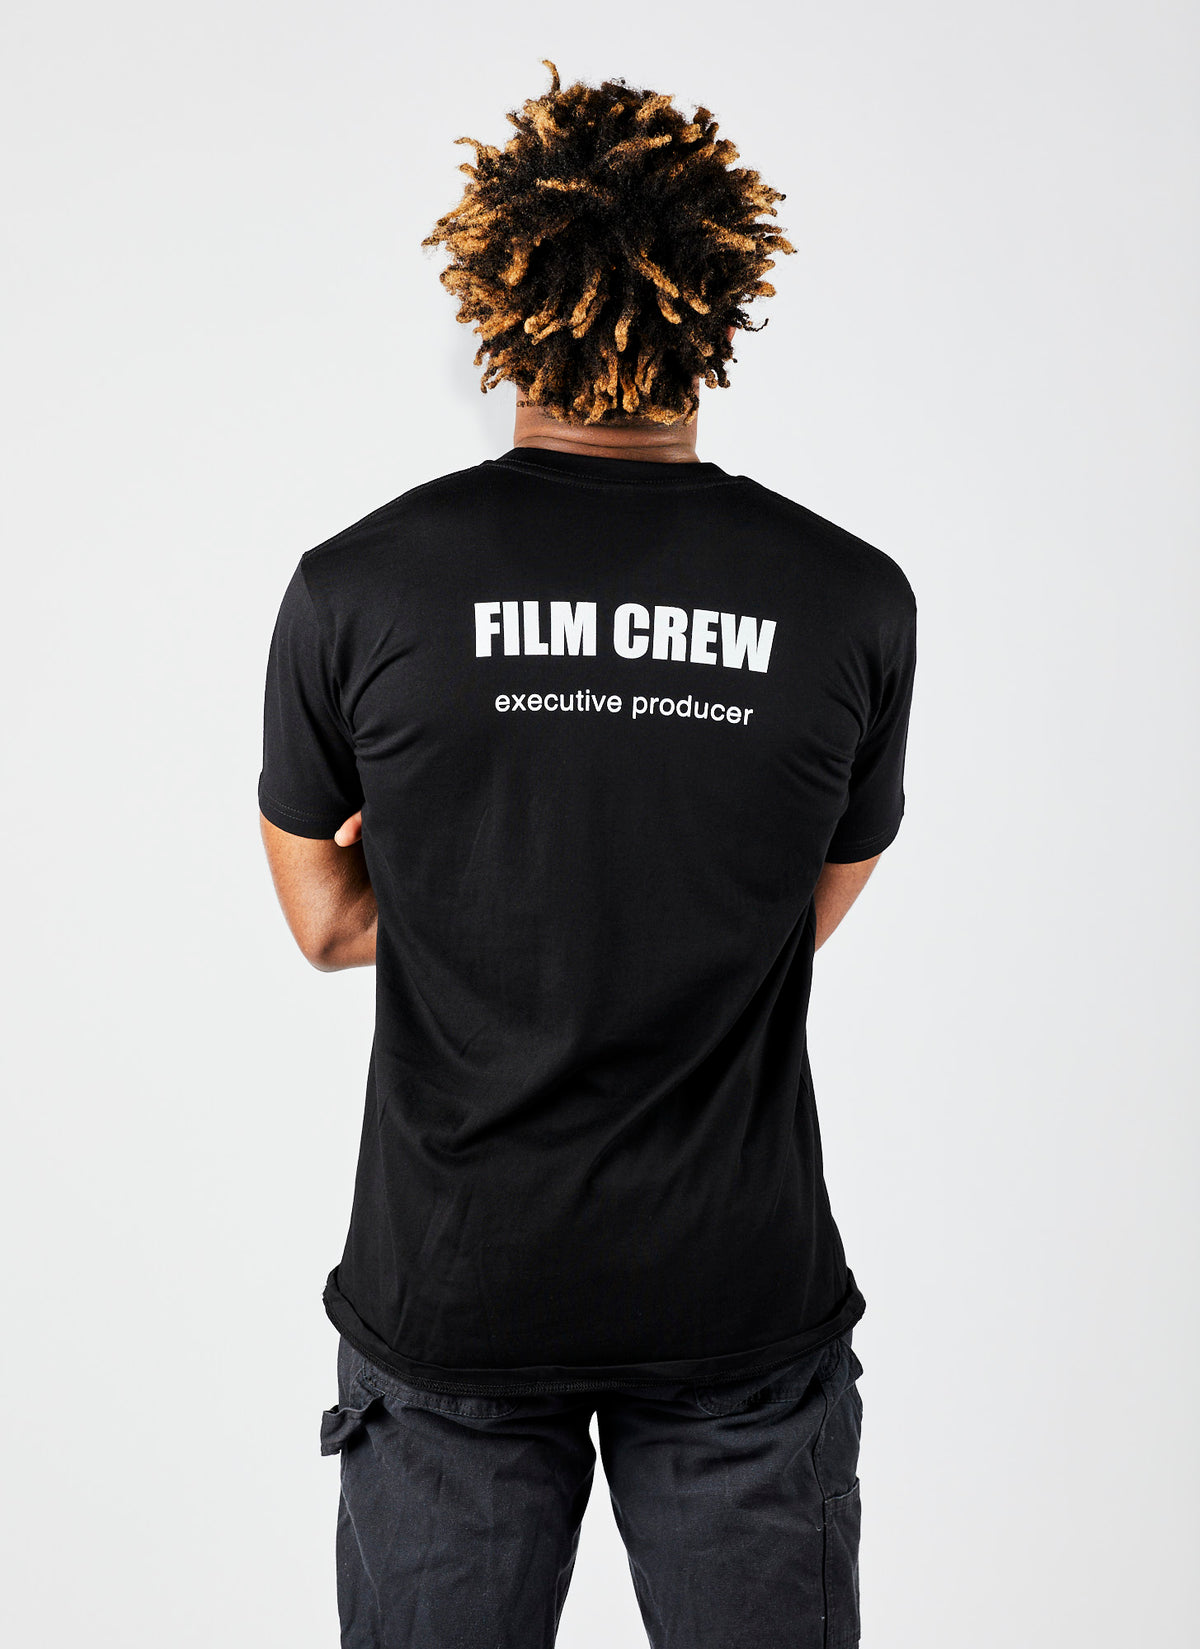 Black, short-sleeved &quot;Executive Producer&quot; shirt for video production crew in Melbourne